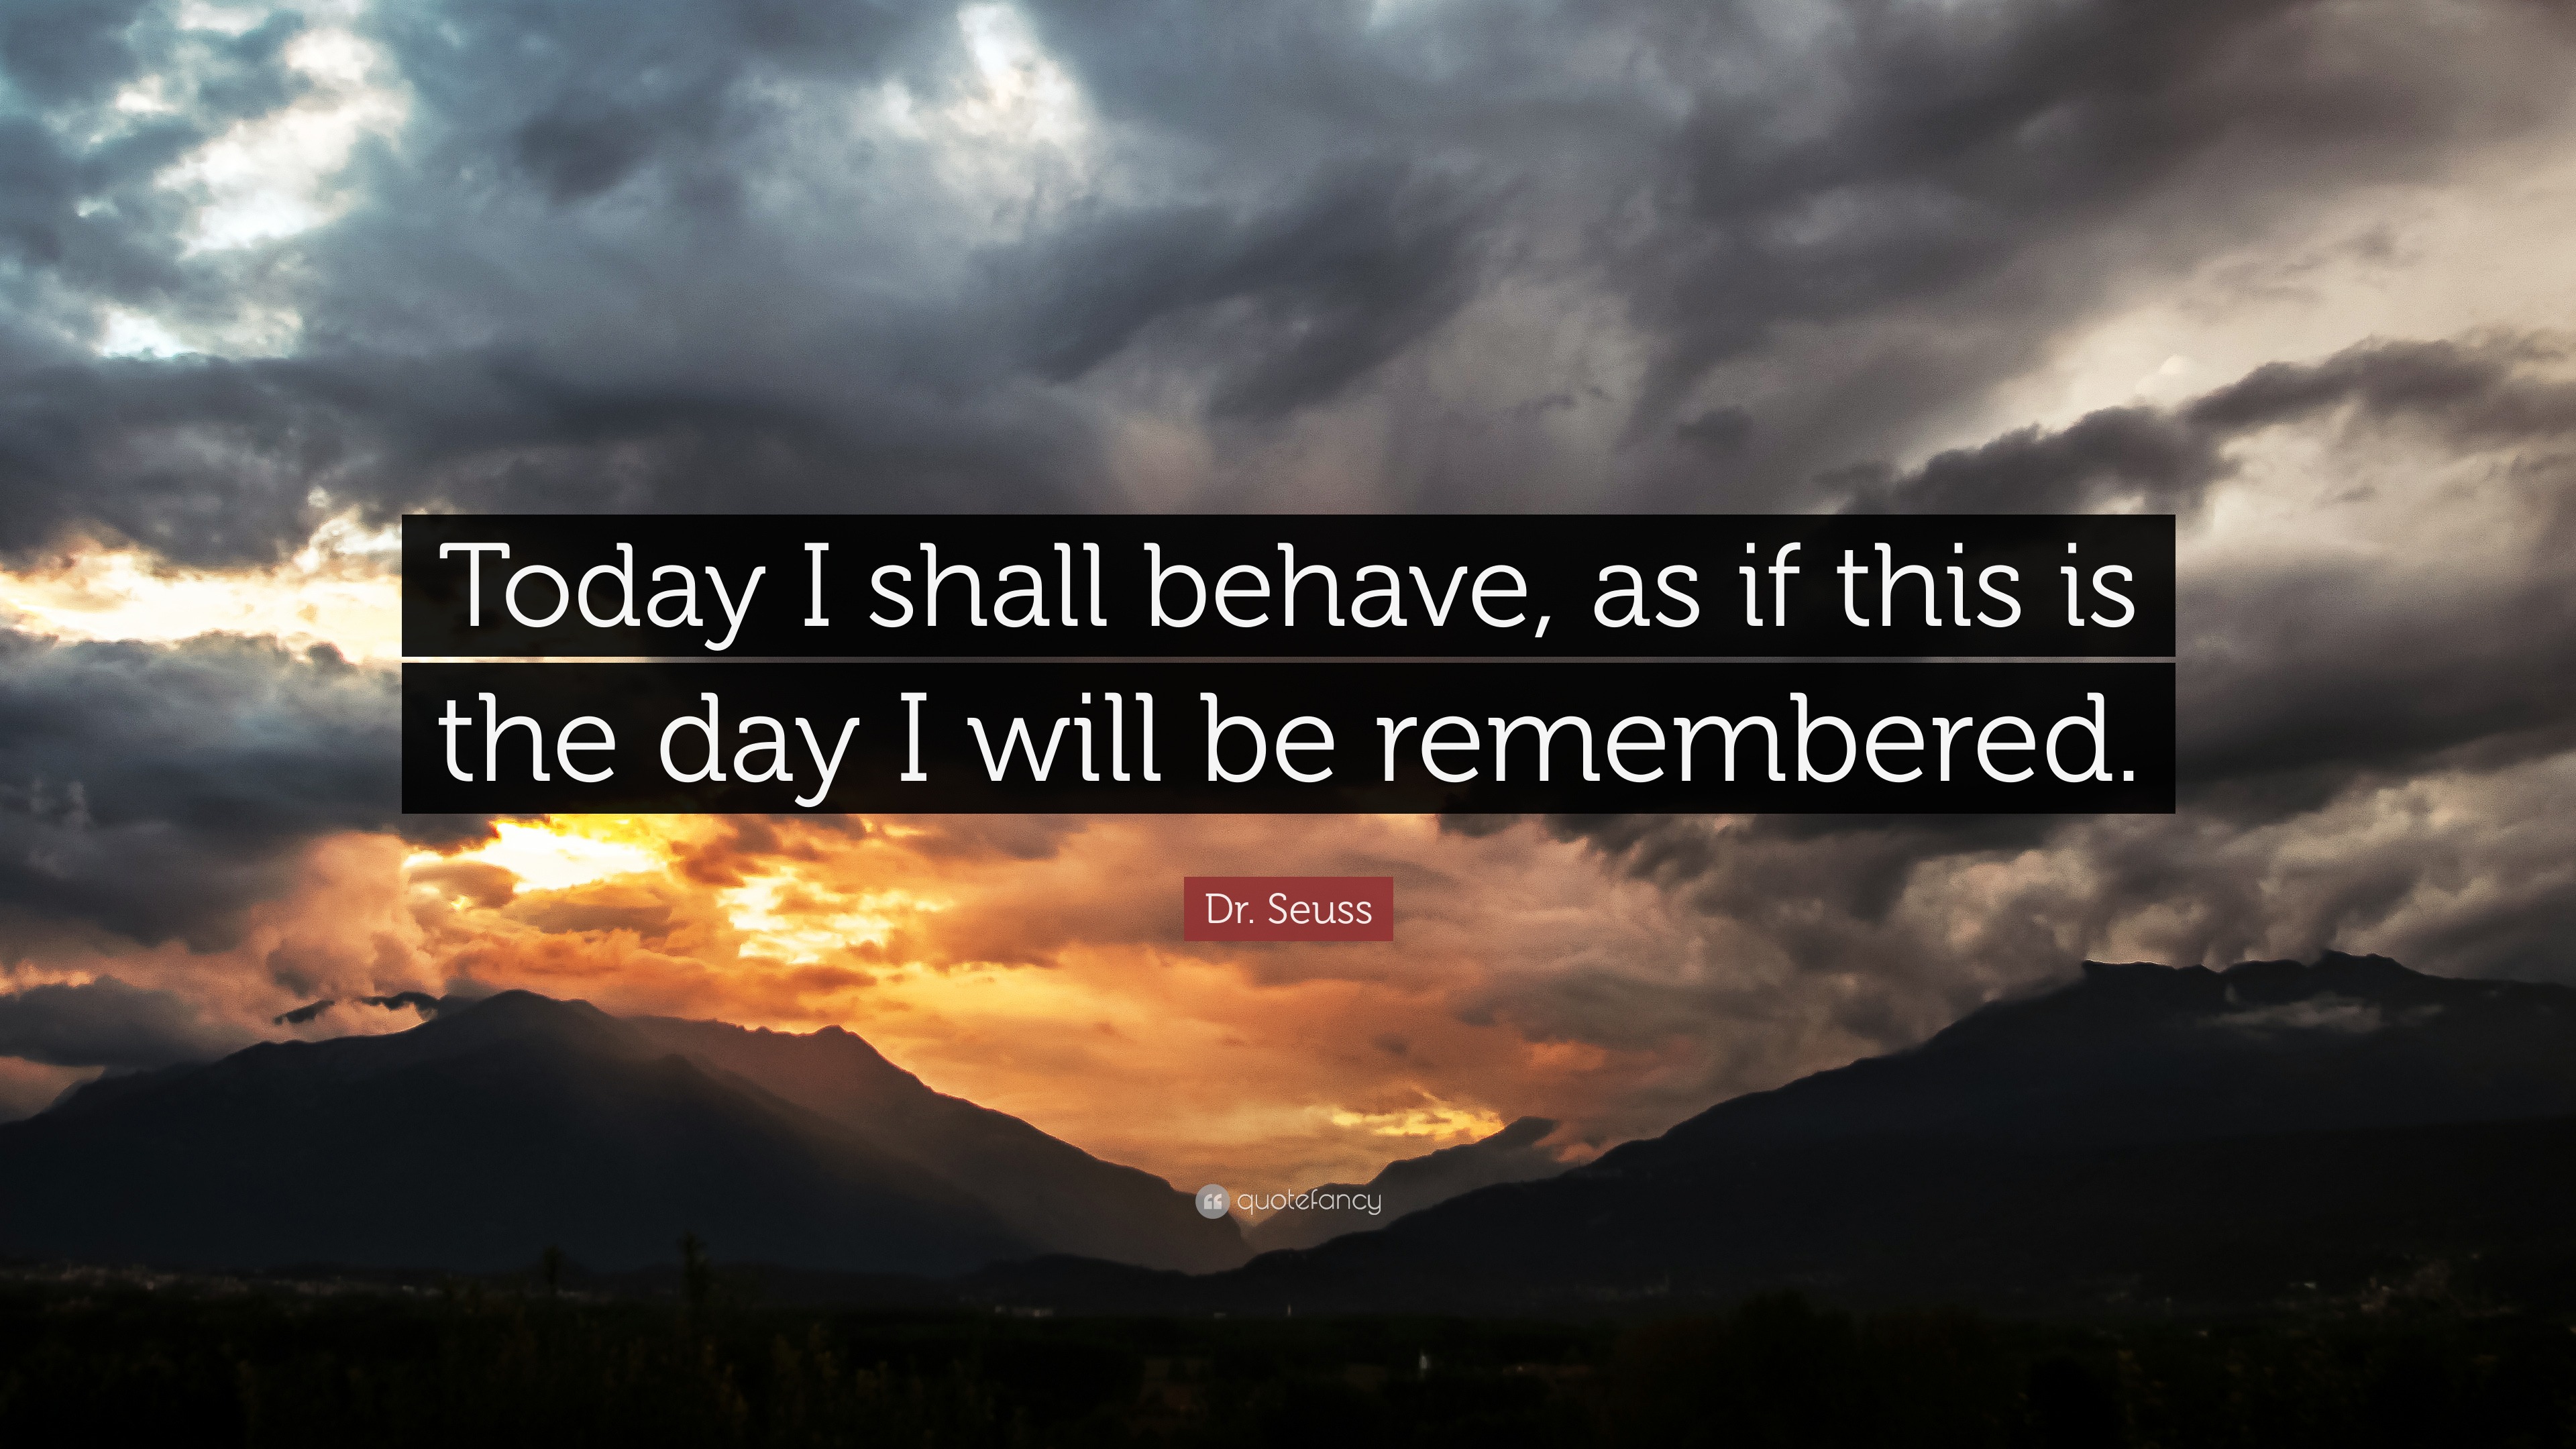 Dr. Seuss Quote: “Today I shall behave, as if this is the day I will be ...